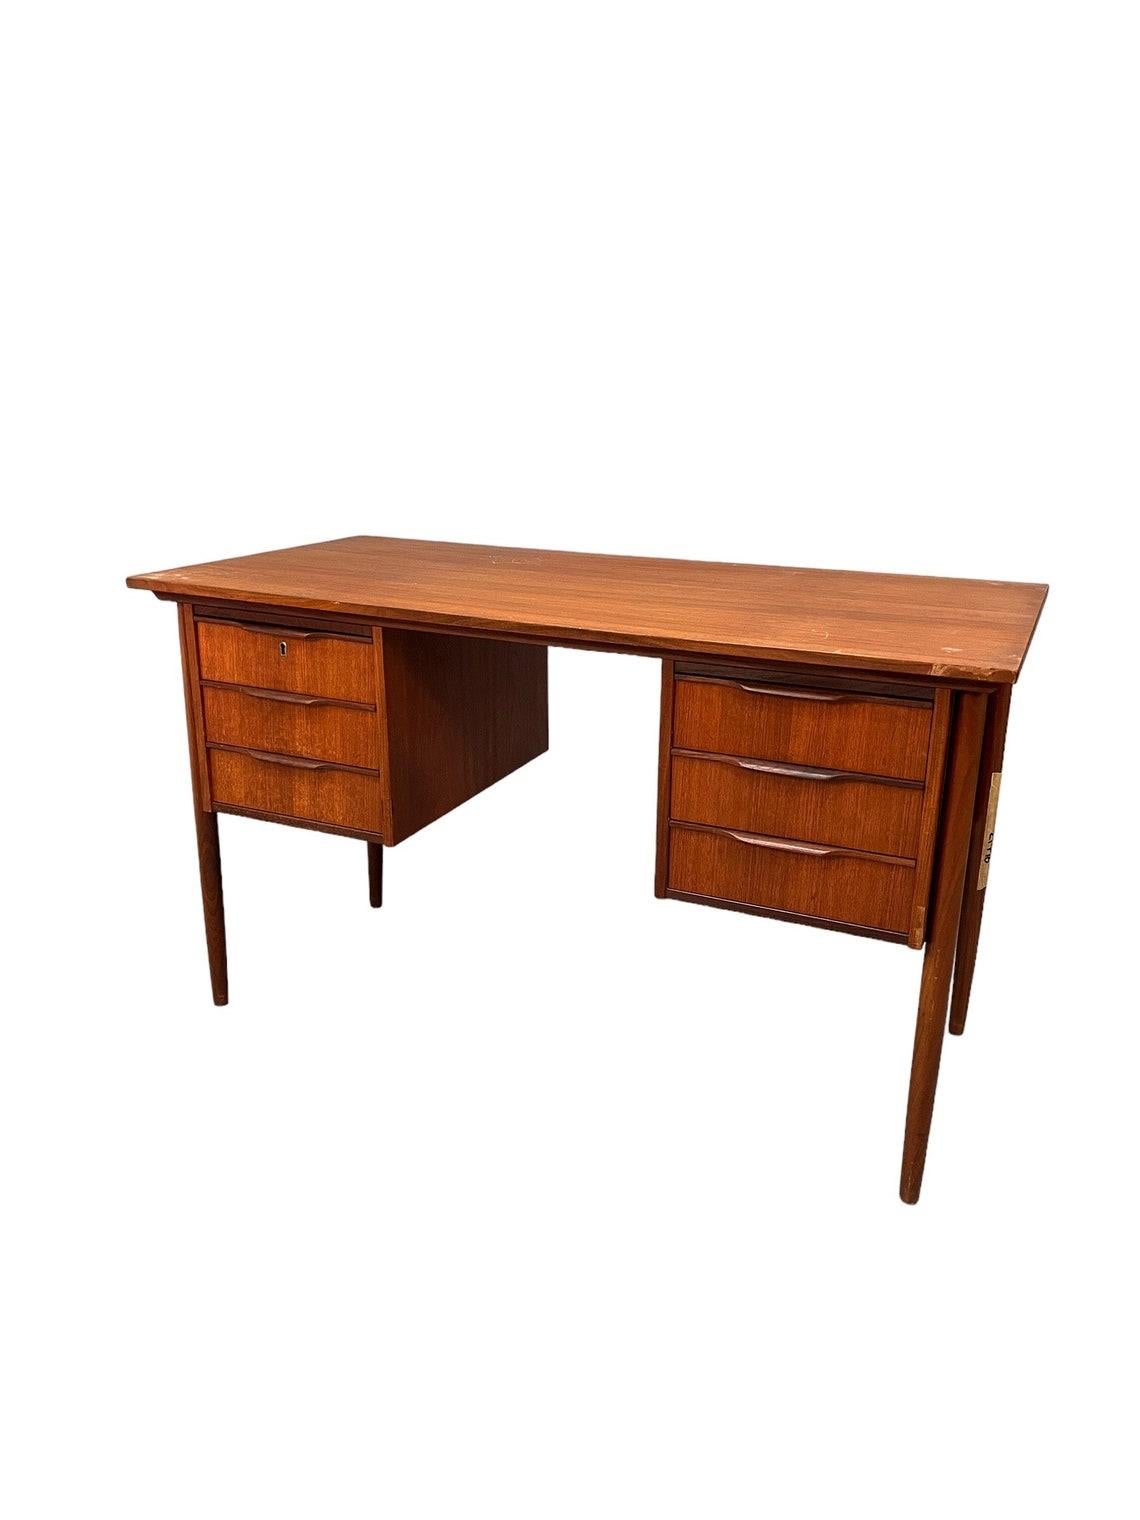 Mid-Century Danish teak desk 1960`s
Beautiful teak desk in classic 1960`s from Denmark

Dimensions:
L:48.5 D:23.5 H:29.5 inches 

Condition:
very good for age and use